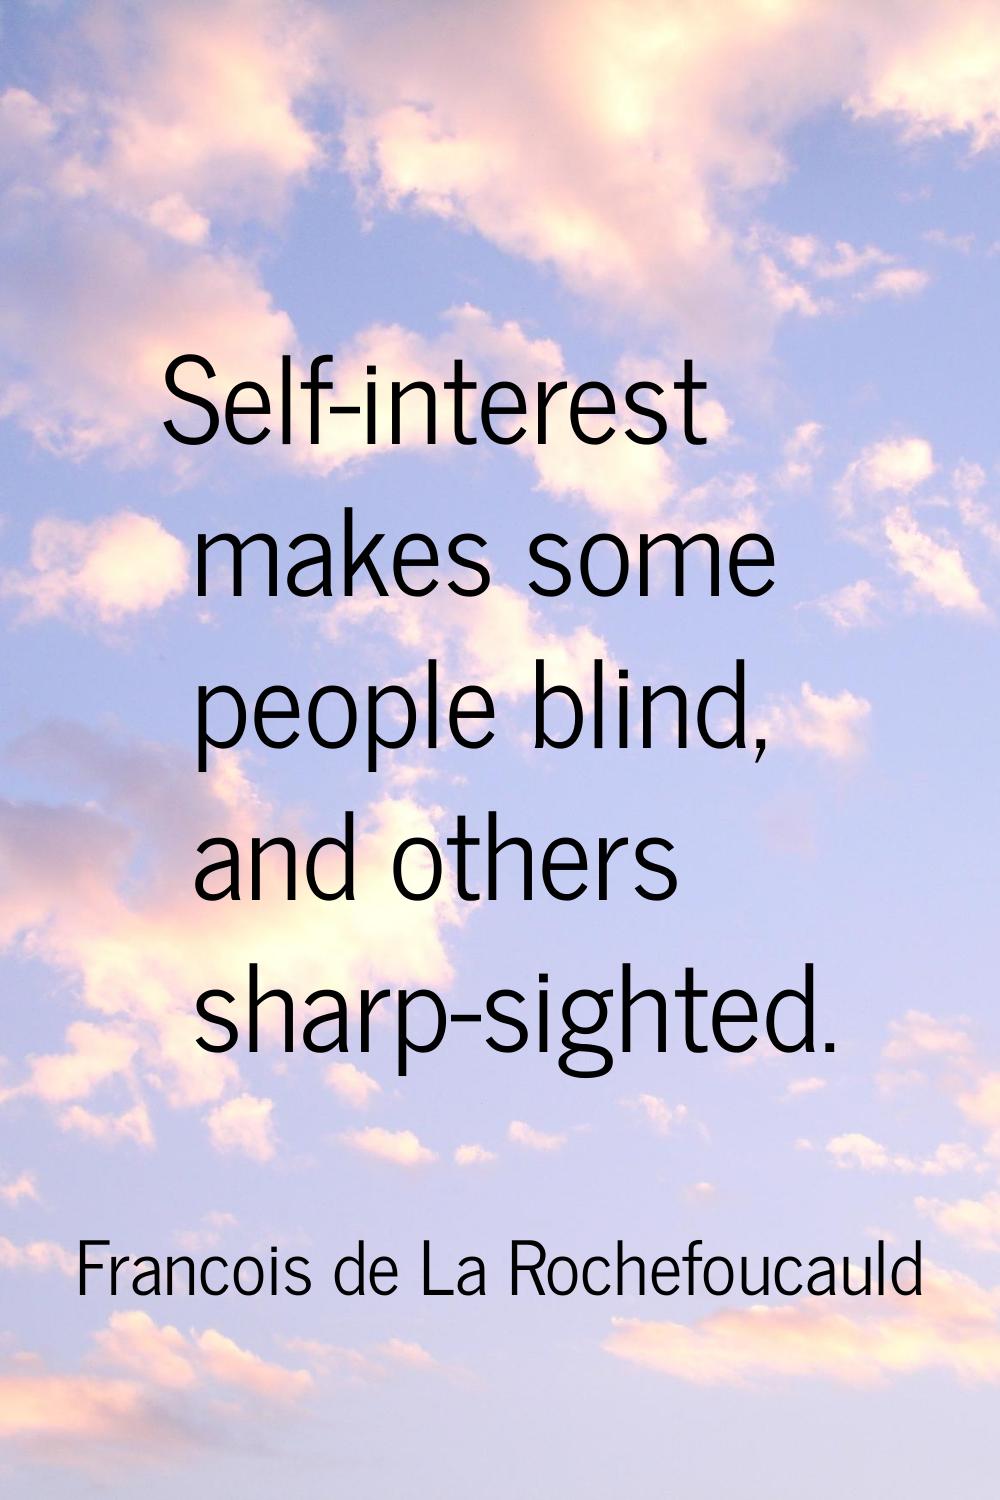 Self-interest makes some people blind, and others sharp-sighted.